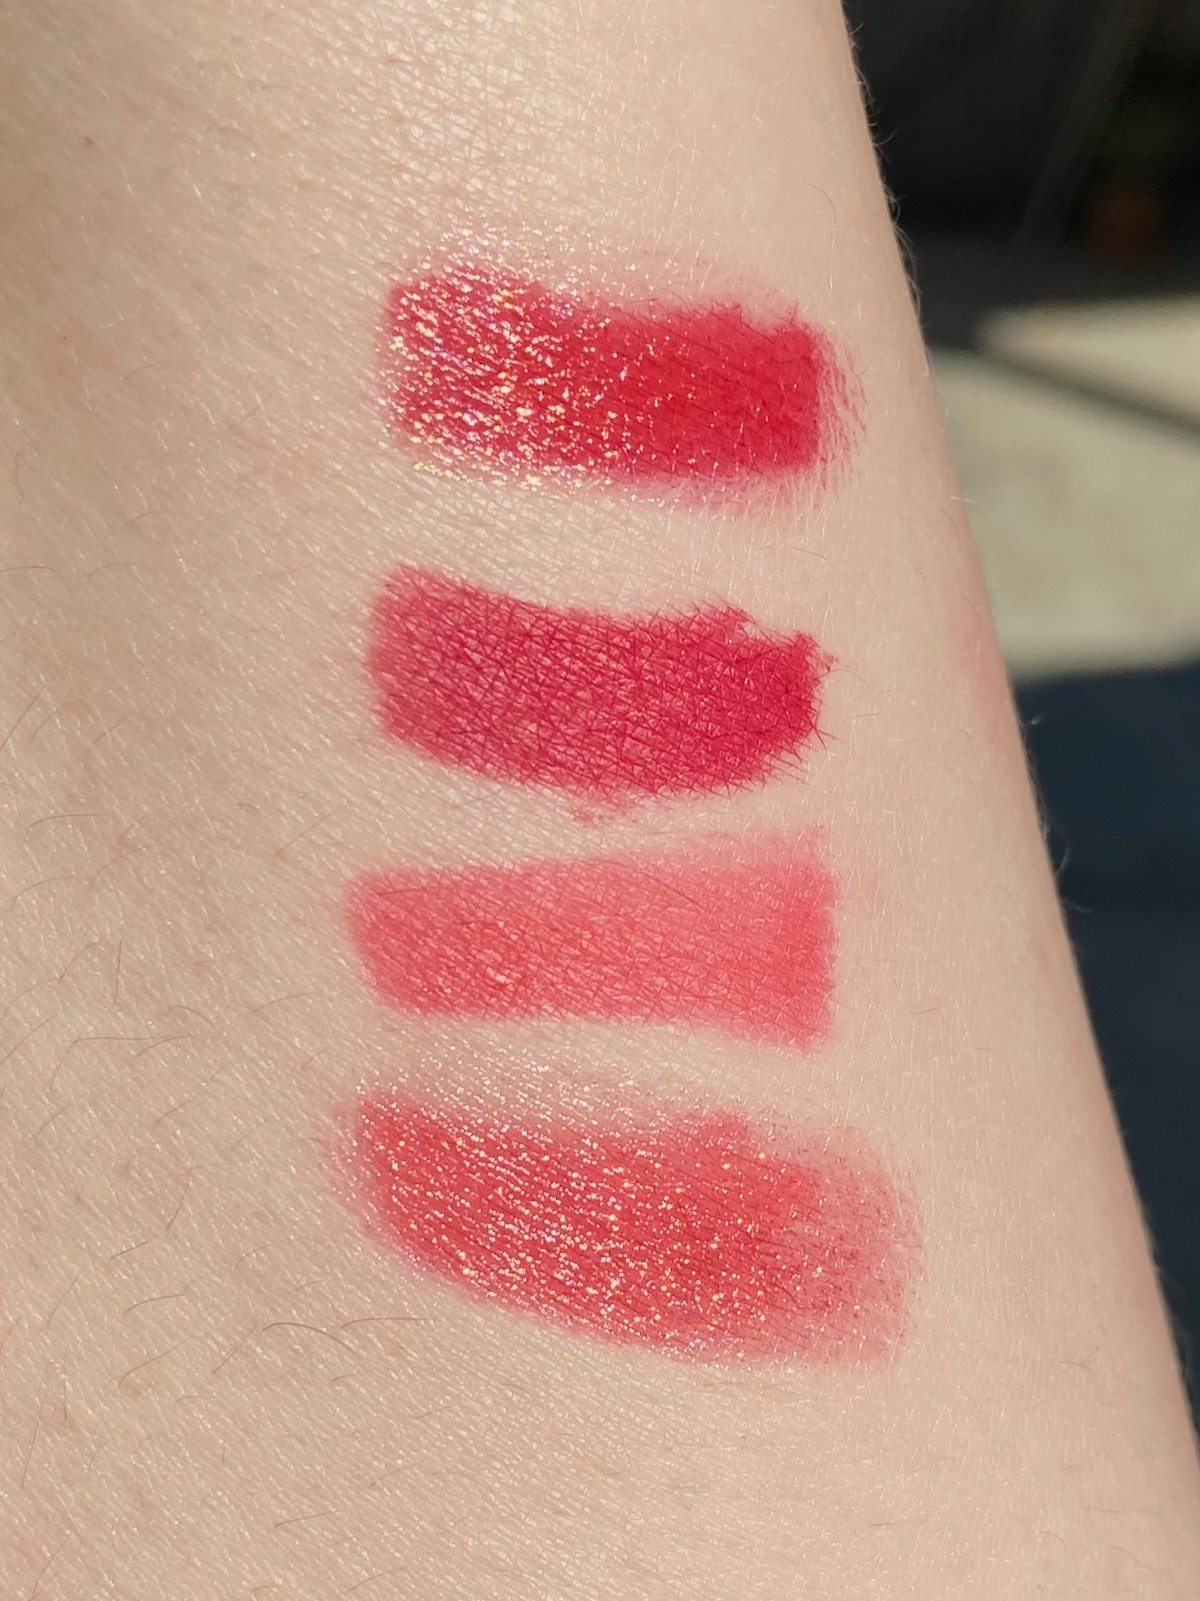 Clarins Sommer 2020 Lip Twist Duo 01 red sunset 03 coral sunrise Swatch Sonne